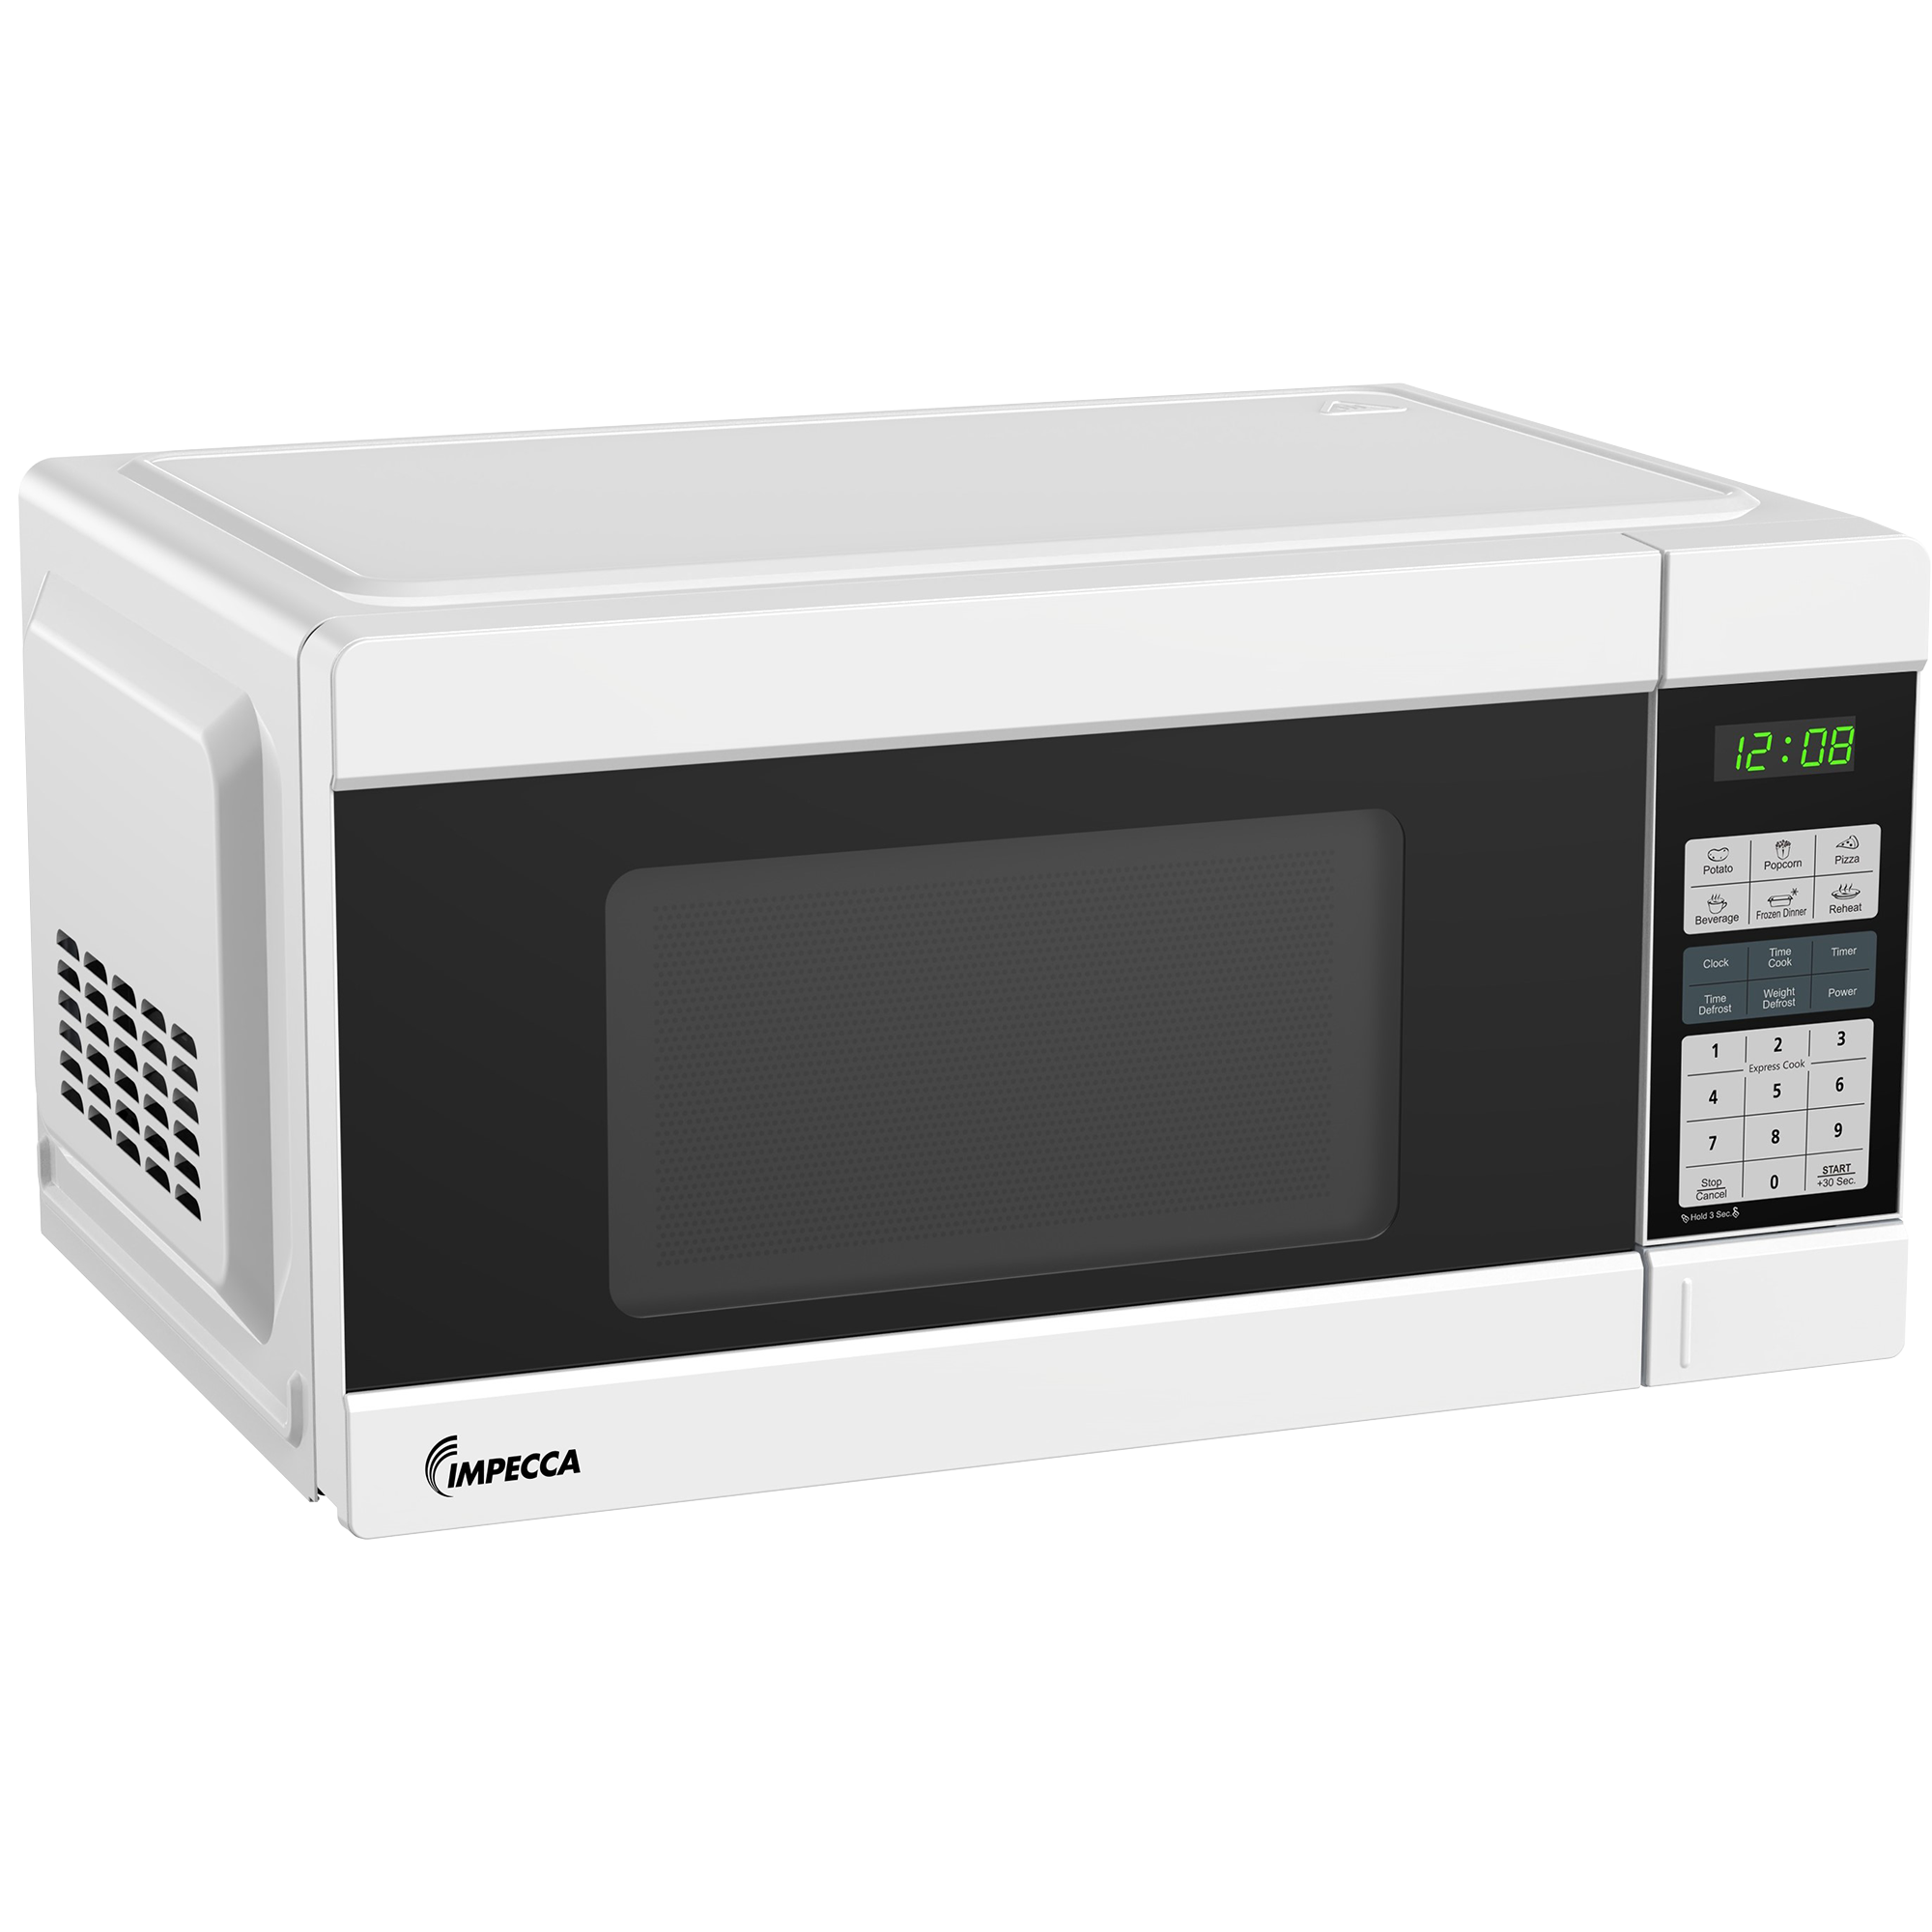 Hamilton Beach 1000 watts microwave oven - appears new in box